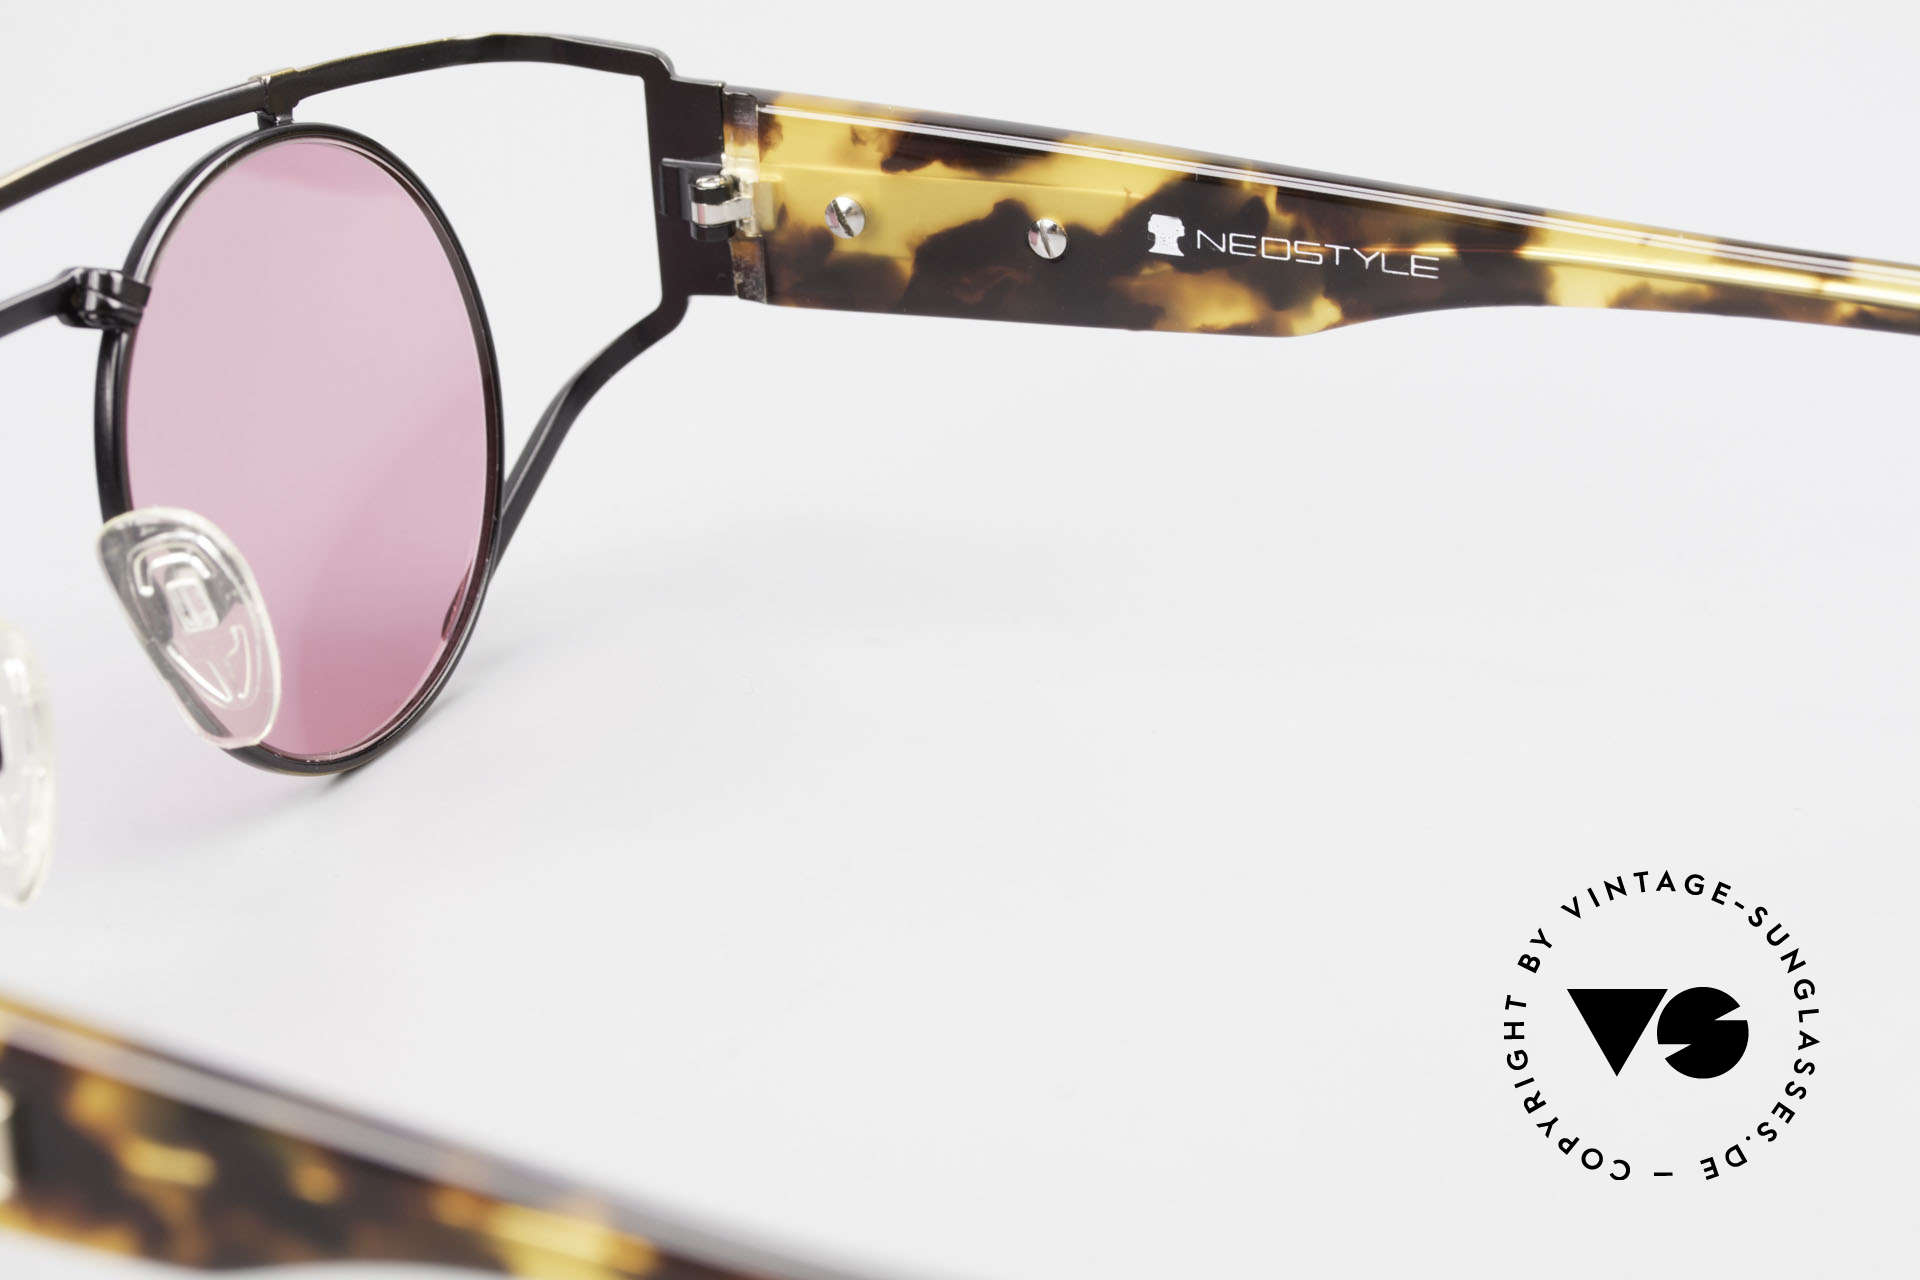 Neostyle Superstar 1 Steampunk Sunglasses Pink, Size: medium, Made for Men and Women